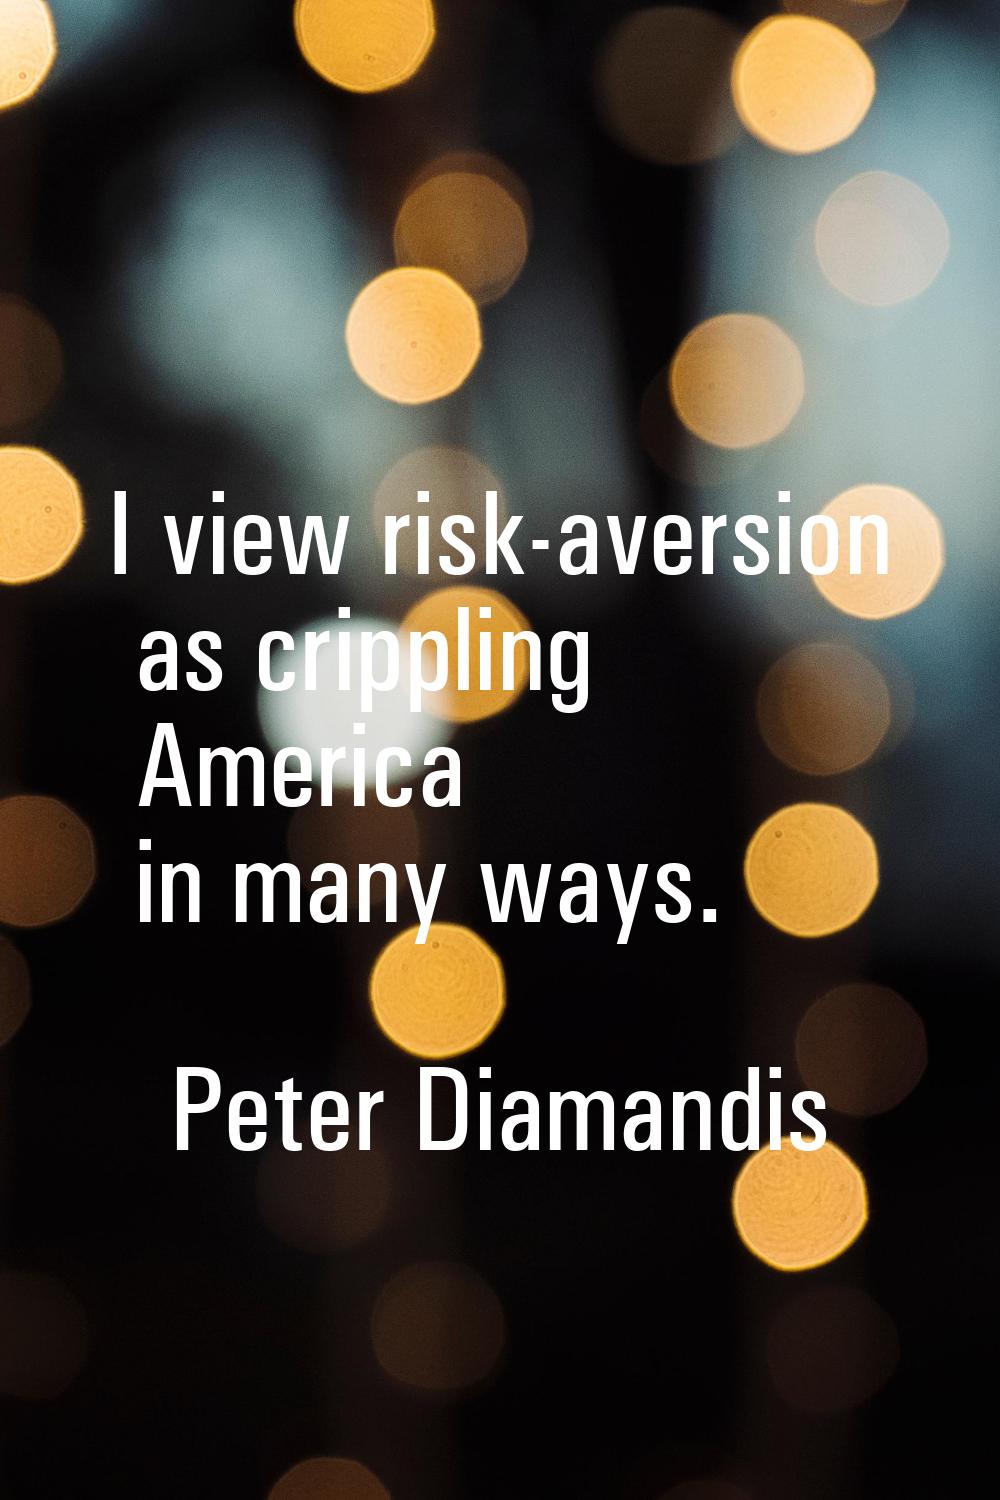 I view risk-aversion as crippling America in many ways.